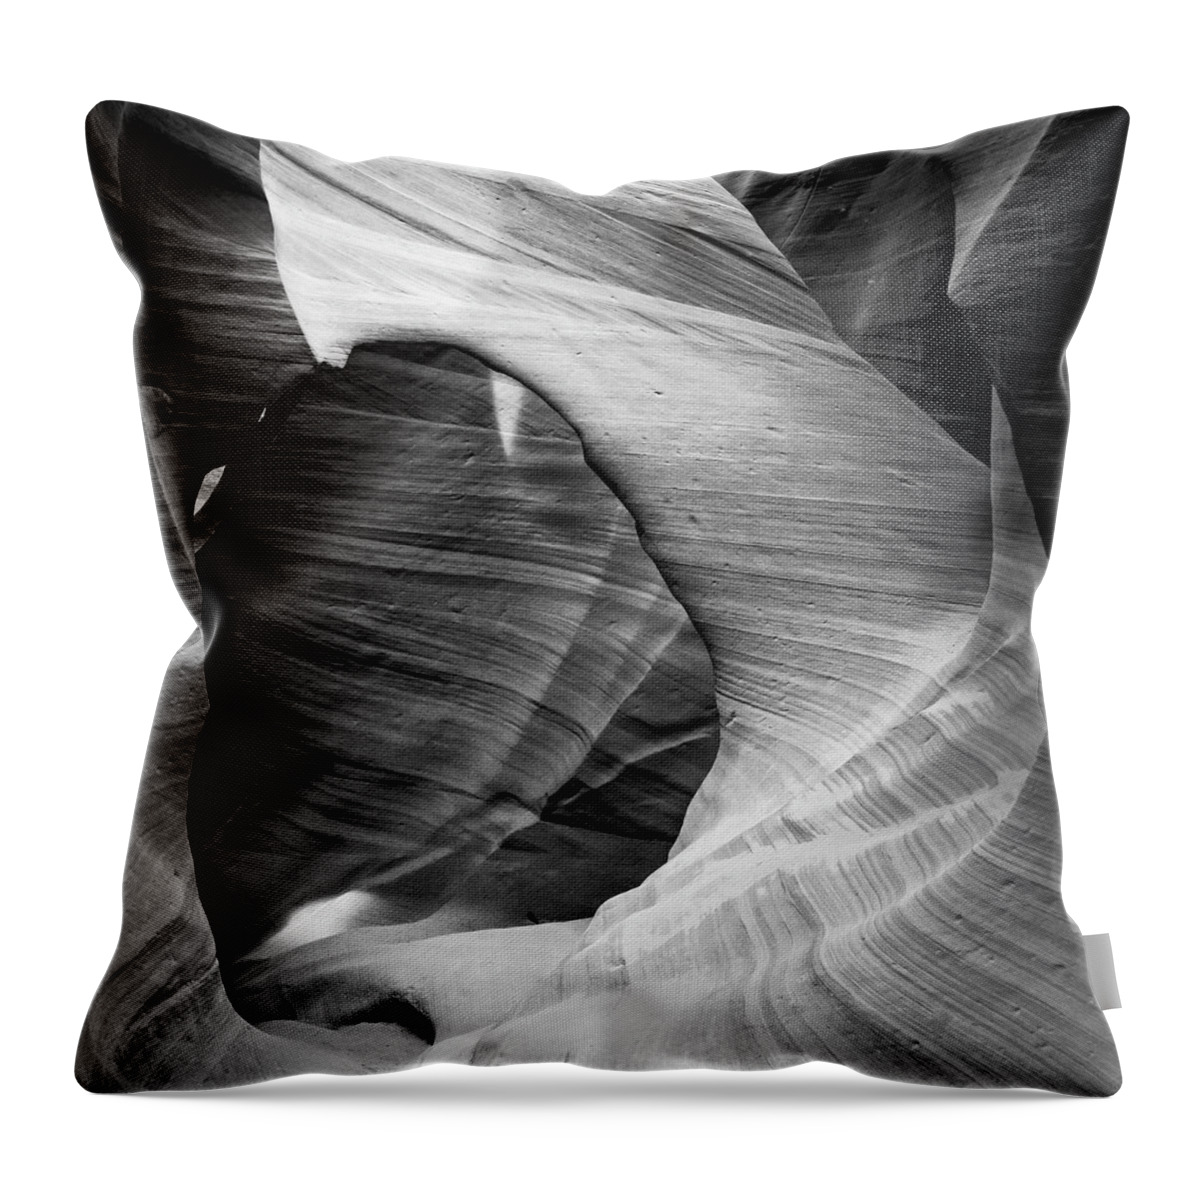 Lower Antelope Canyon Throw Pillow featuring the photograph The Passage by John Roach